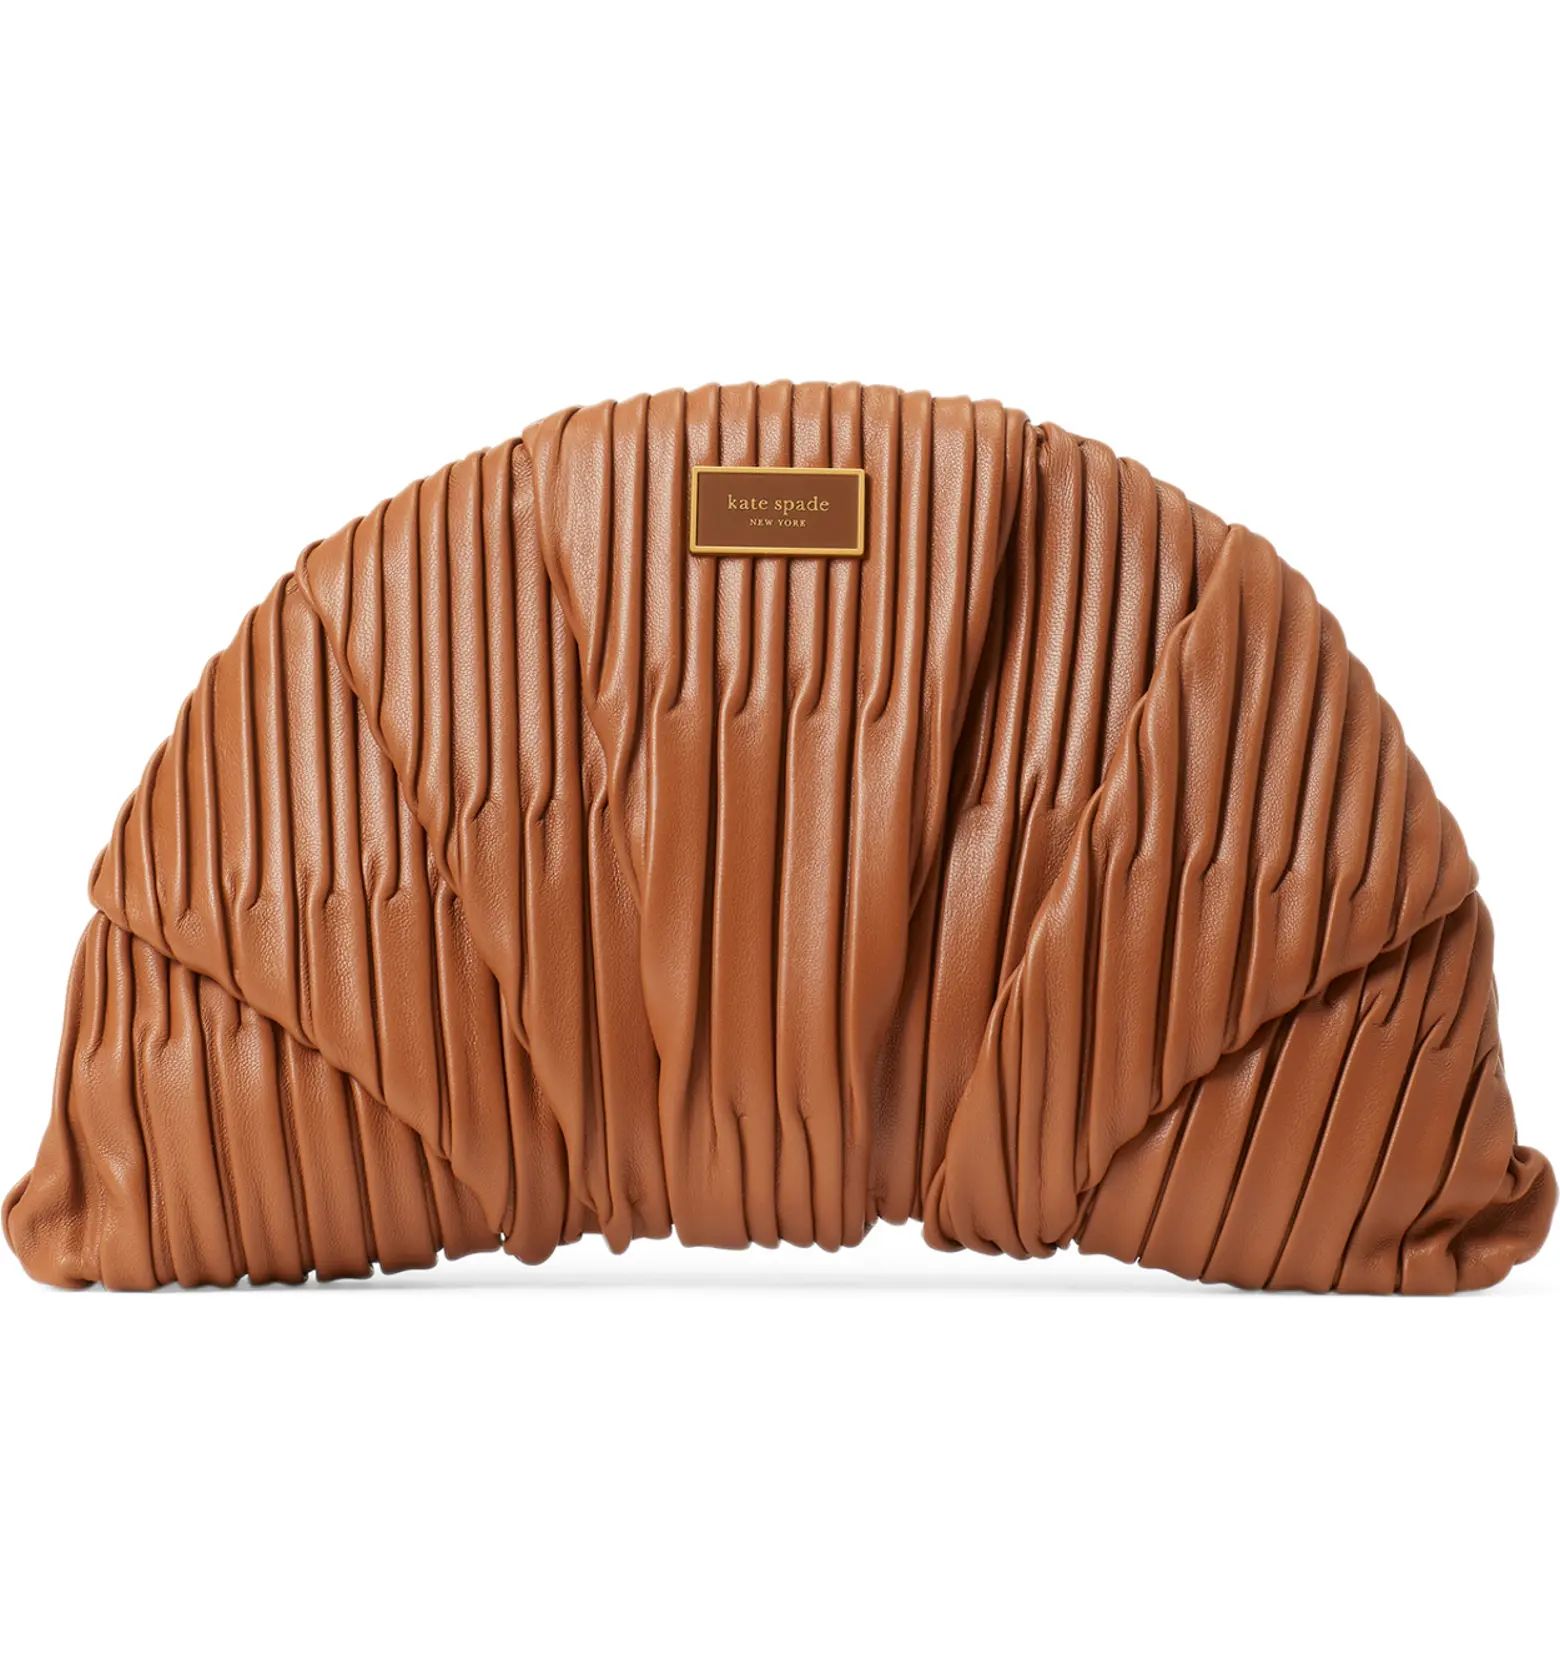 kate spade new york patisserie pleated croissant clutch | Nordstrom | Nordstrom